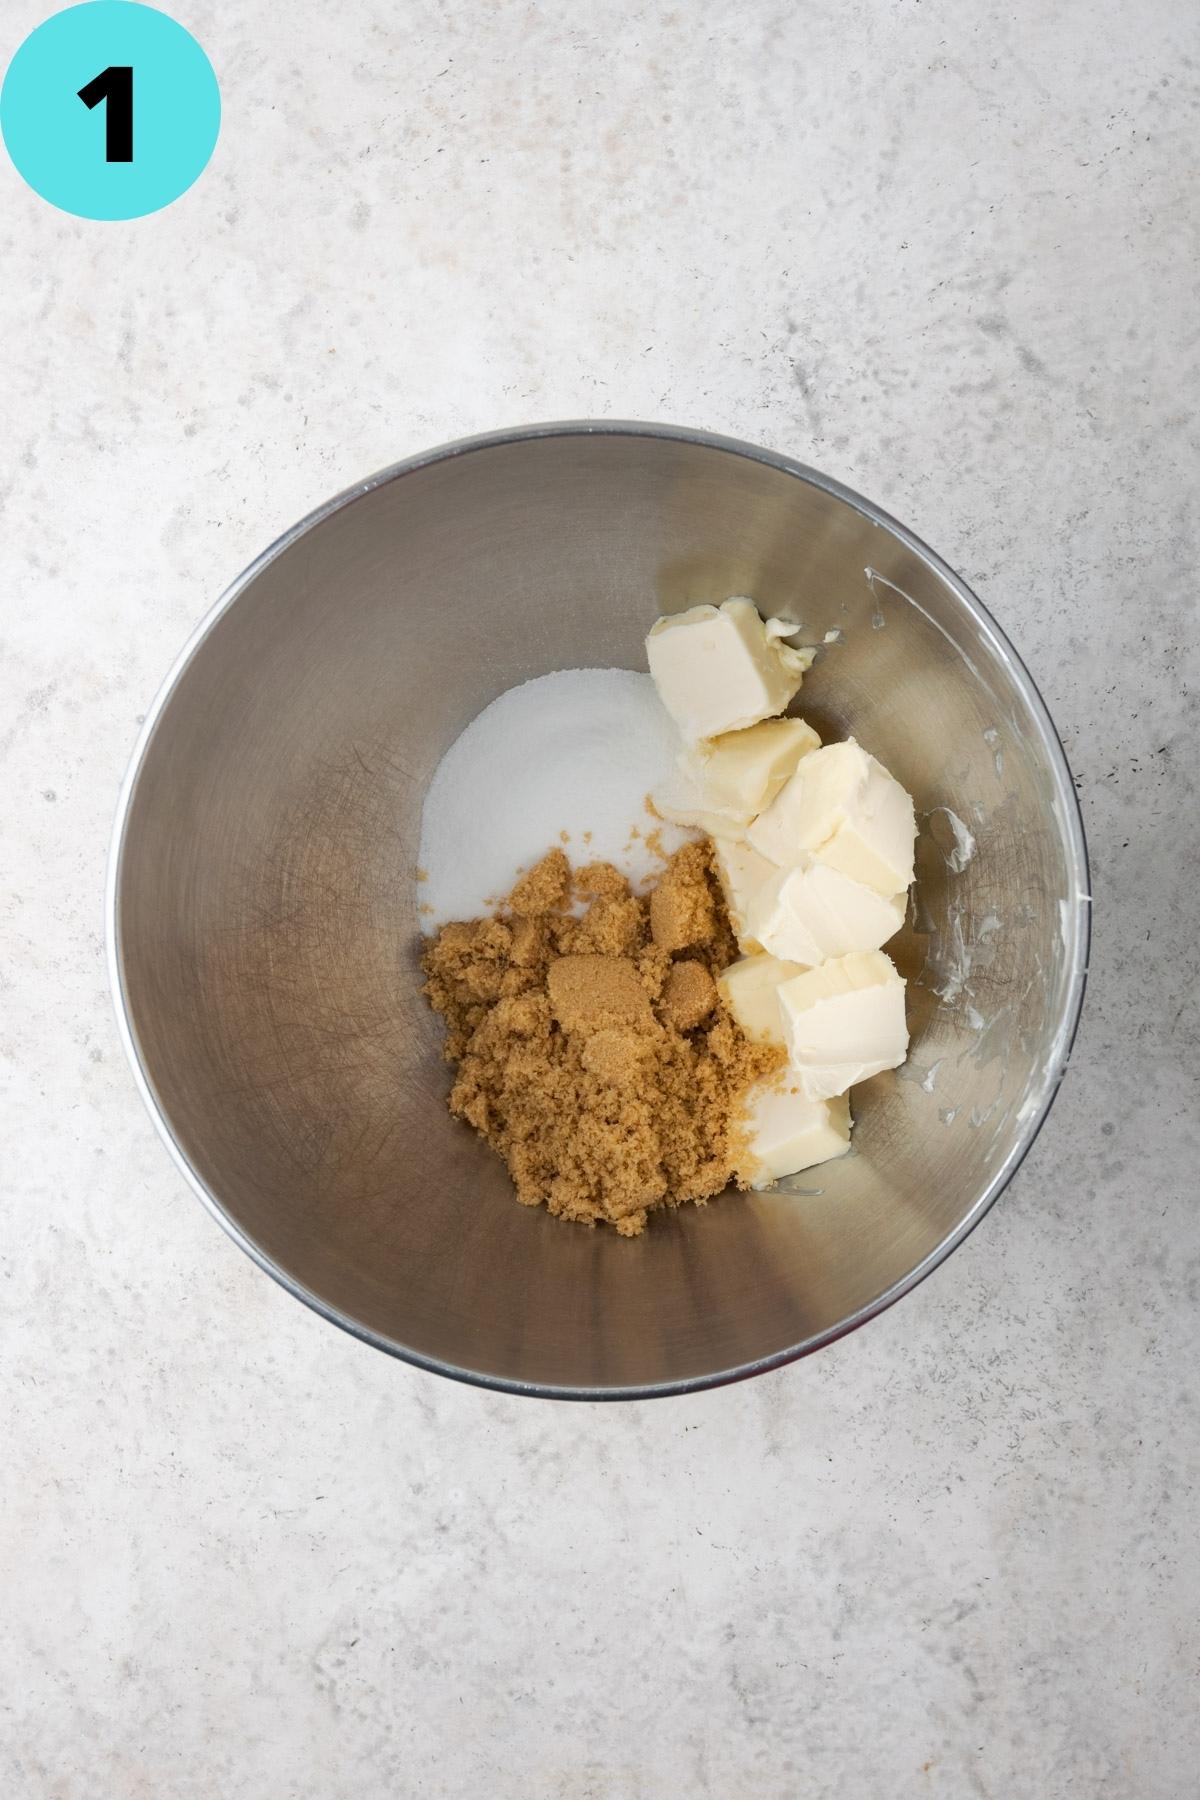 Butter and sugars in a metal mixing bowl.